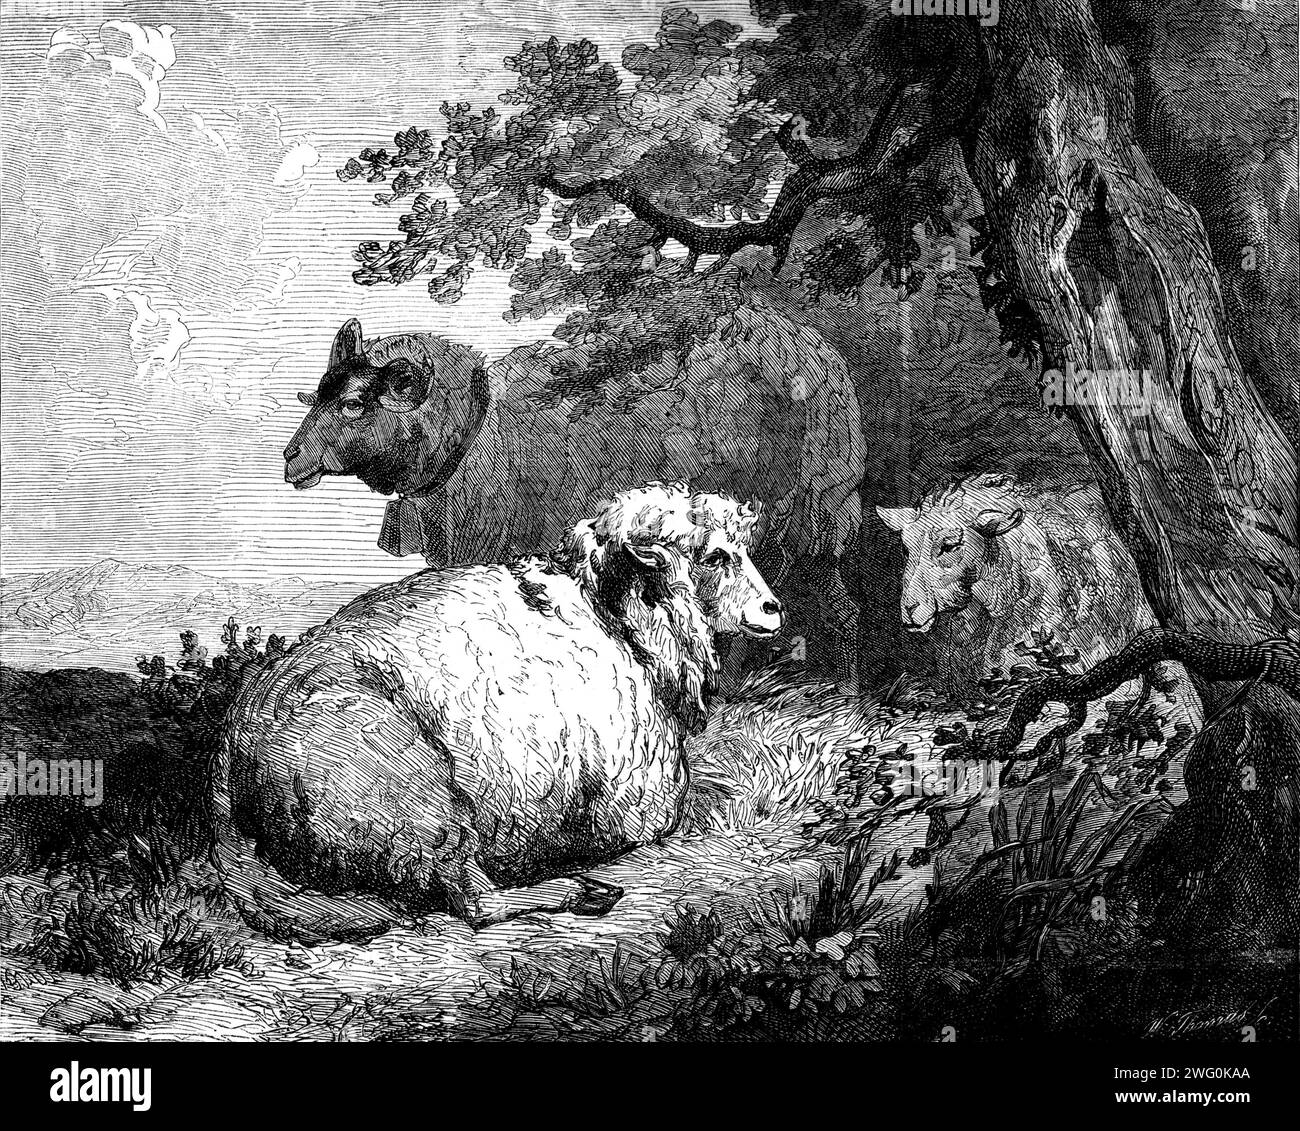 &quot;Sheep&quot;, by Morland, in the International Exhibition, 1862. 'There is no painter of the English school, with the exception of Gainsborough, who could have treated so simple a subject with such true feeling for rustic nature, such skill and harmony of arrangement, and such consummate facility of handling as Morland has shown in the beautiful little picture we have engraved. Morland's works, like those of Gainsborough, are rather sketches than finished pictures; but this one has, with all the charm of a sketch, none of the carelessness and slovenliness which too often disfigure the pai Stock Photo